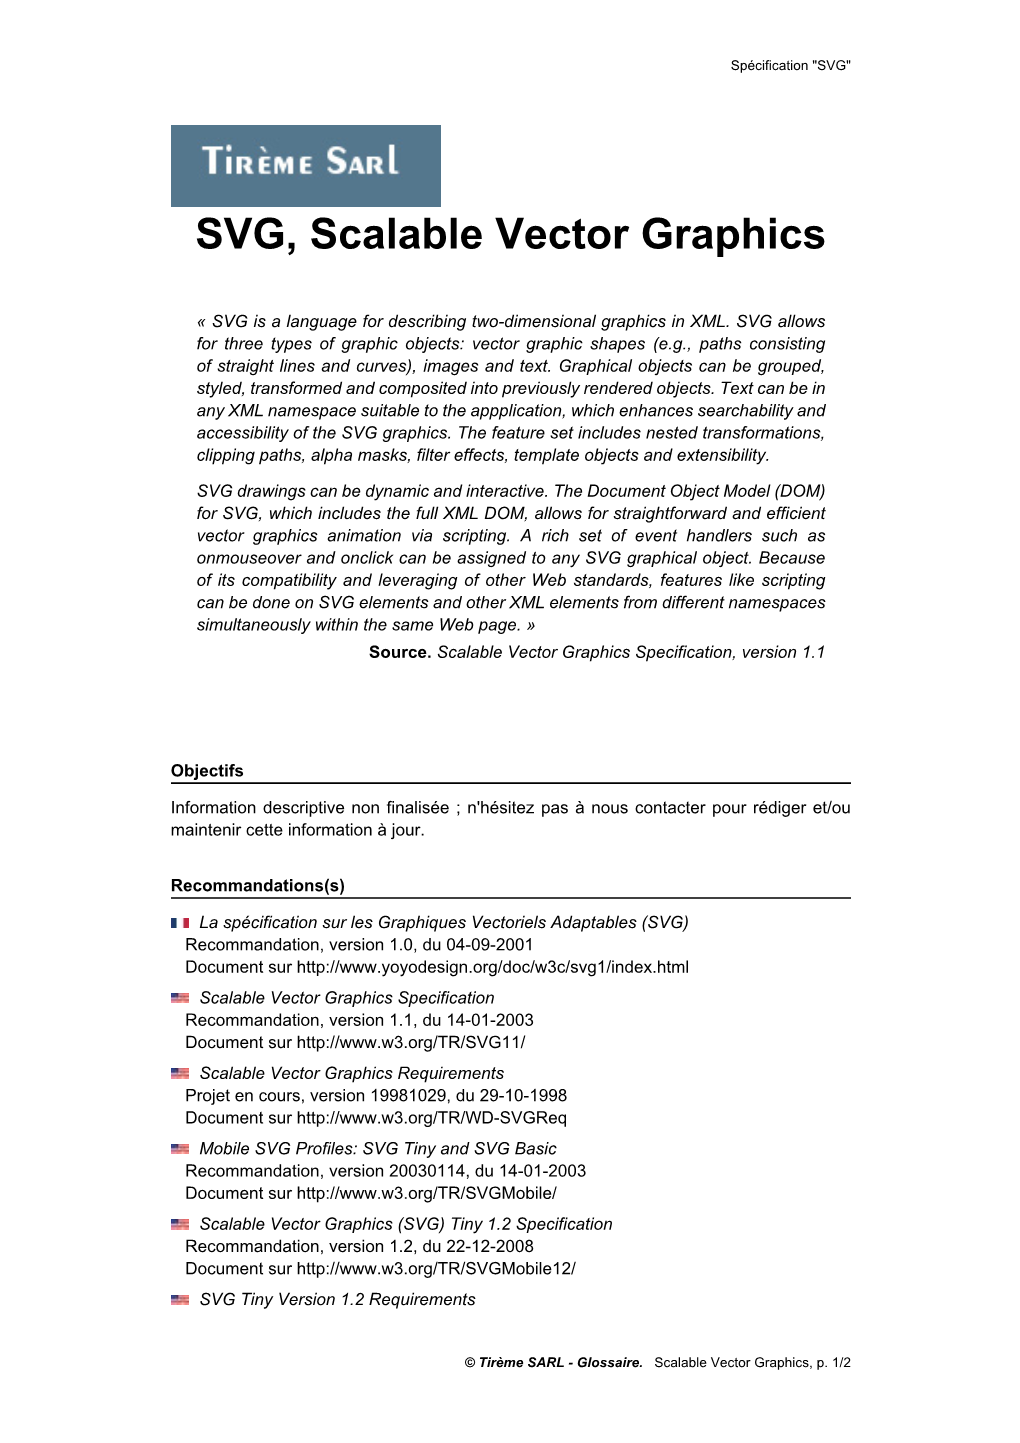 SVG, Scalable Vector Graphics